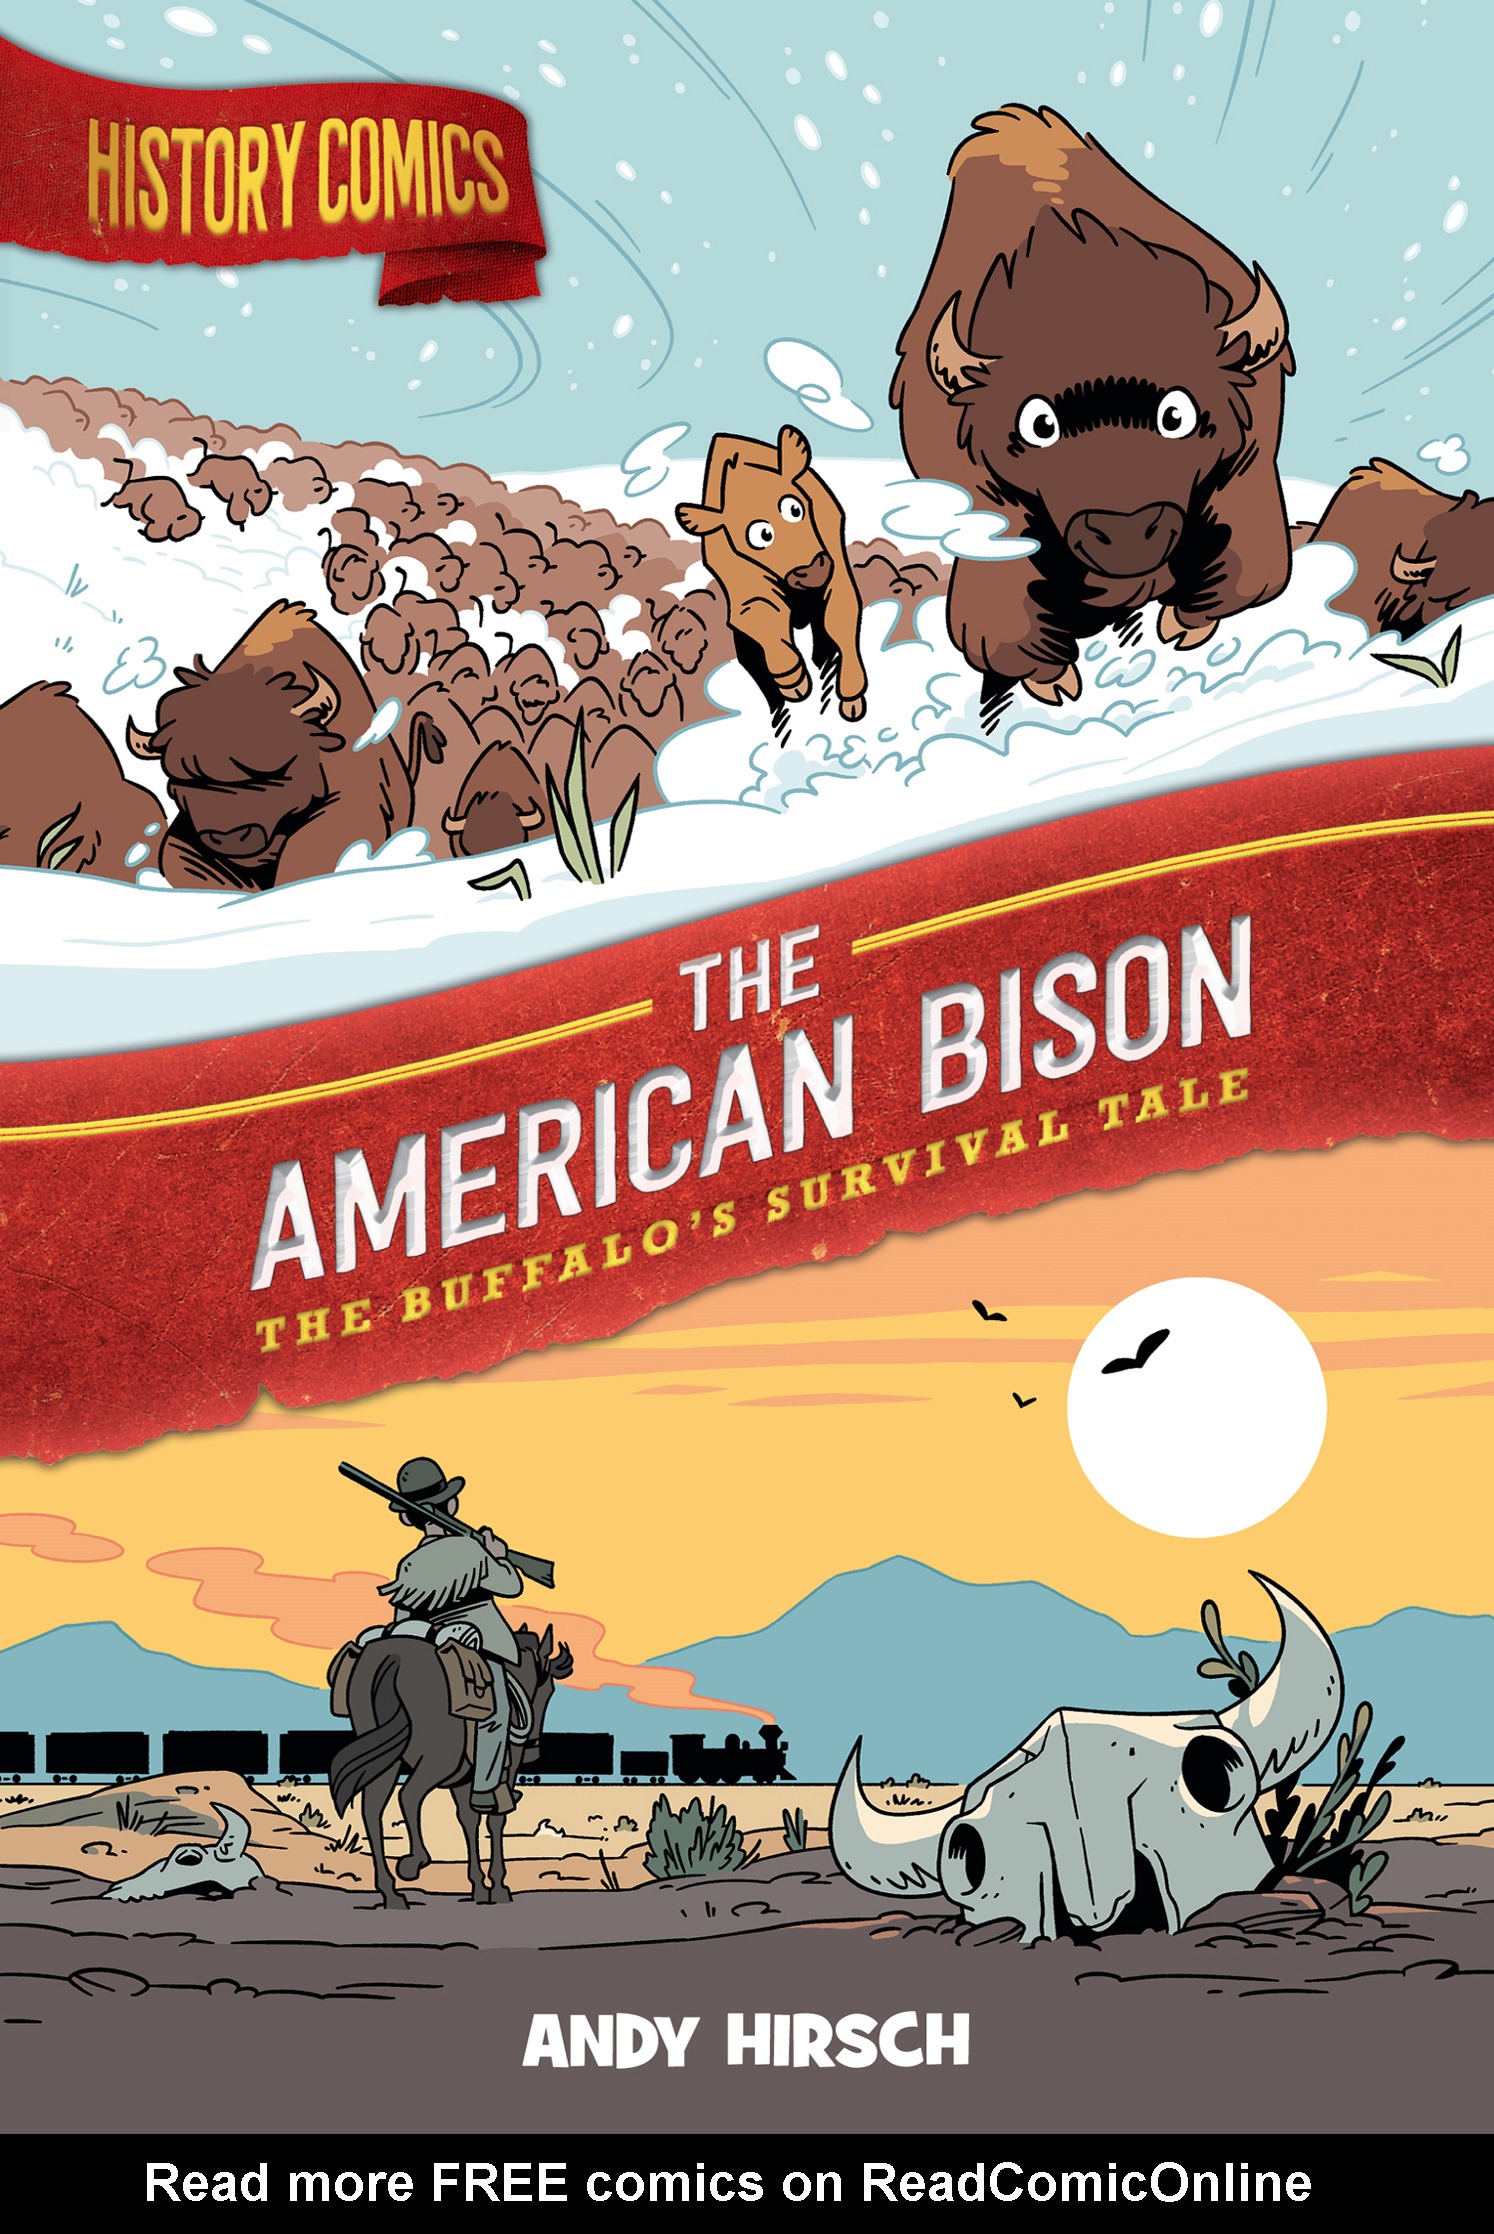 Read online History Comics comic -  Issue # The American Bison - The Buffalos Survival Tale - 1